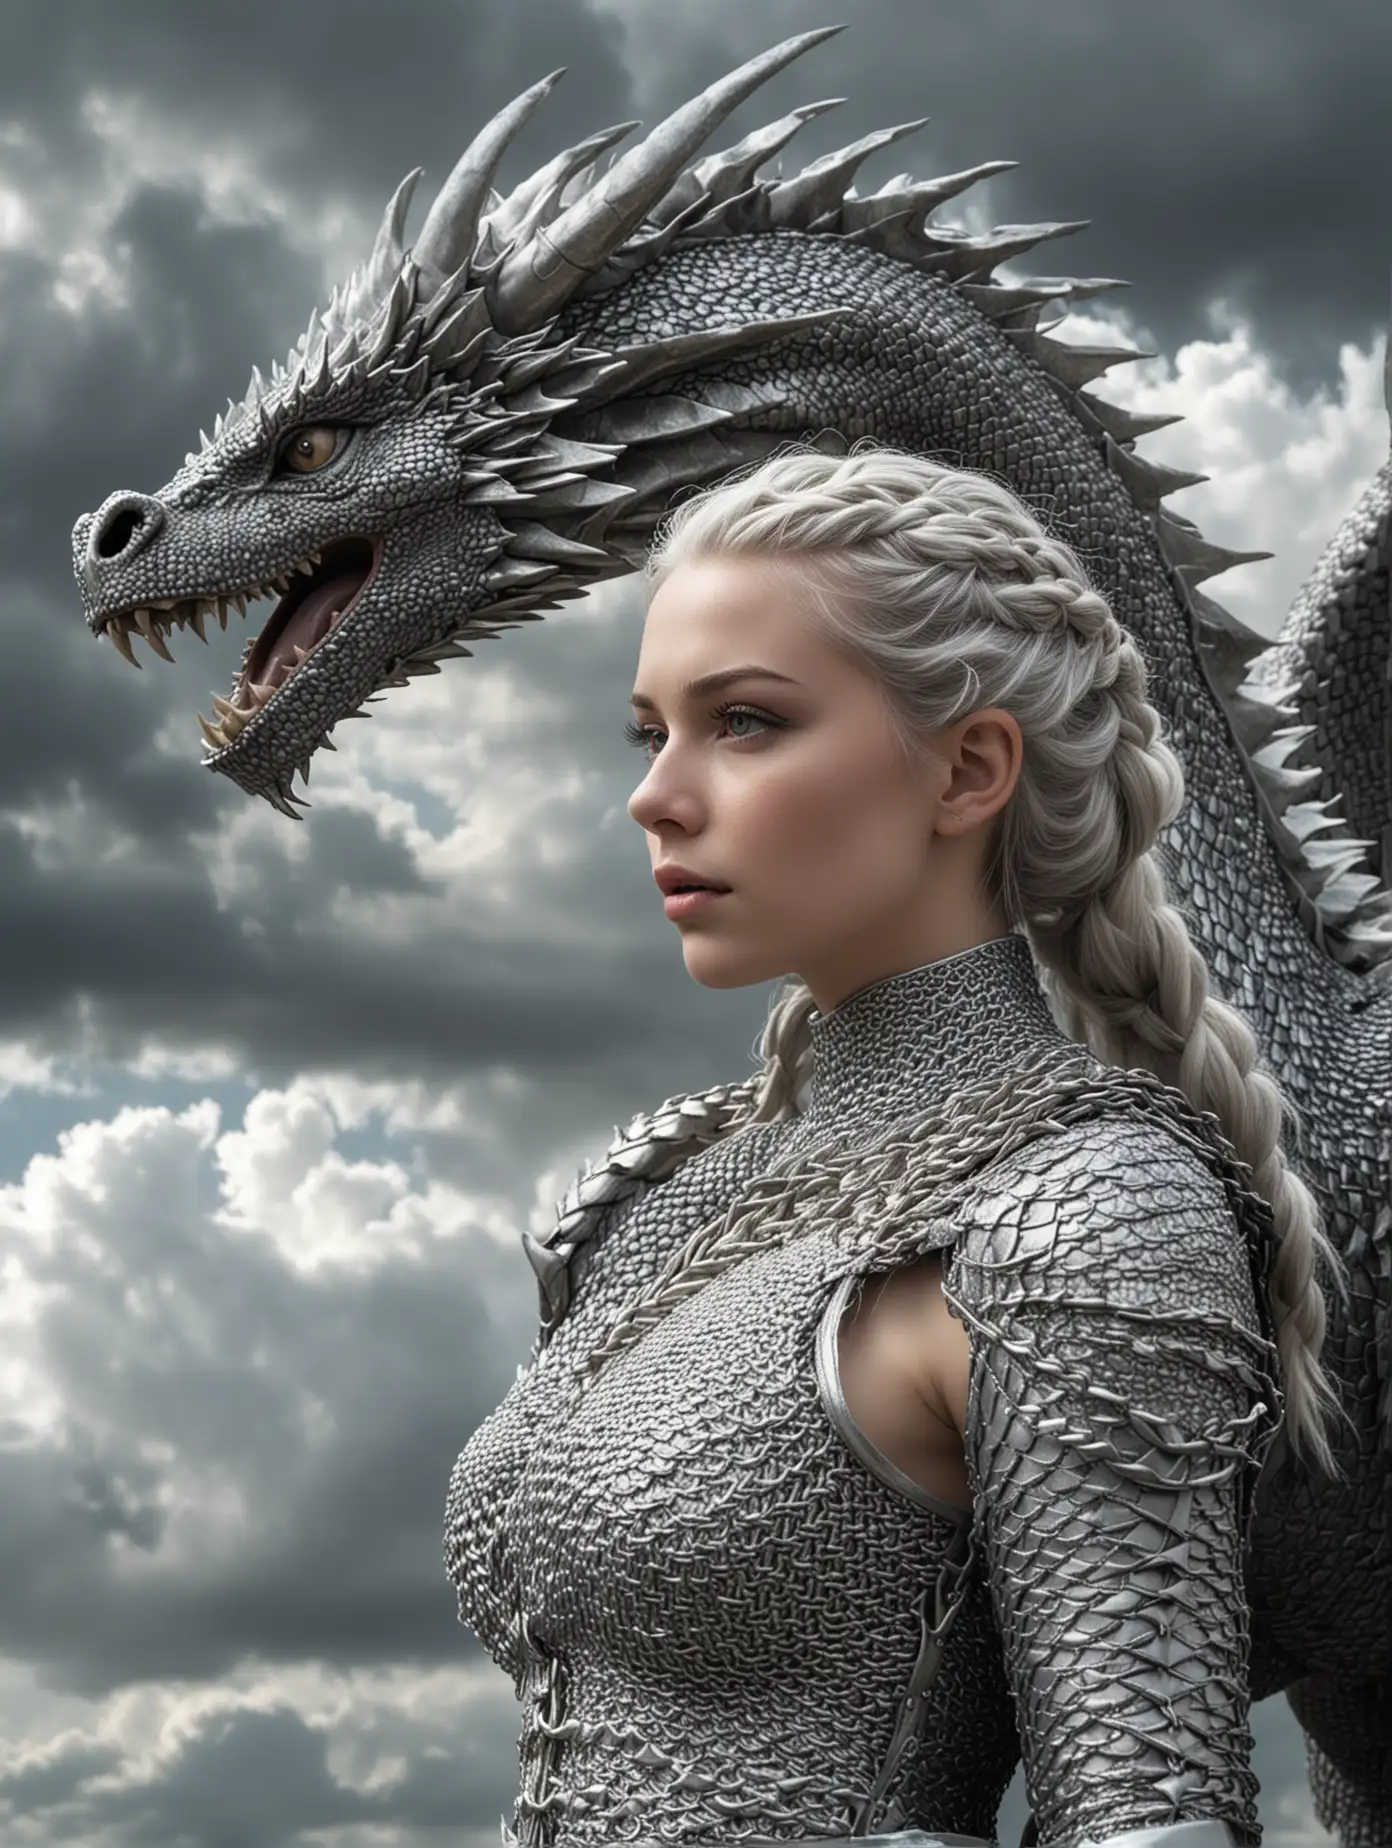 High resolution photo of a young woman, with braided silver hair and pale white skin, wearing chainmail, on a giant grey and silver dragon in the sky, wind blowing her hair, medieval fantasy setting